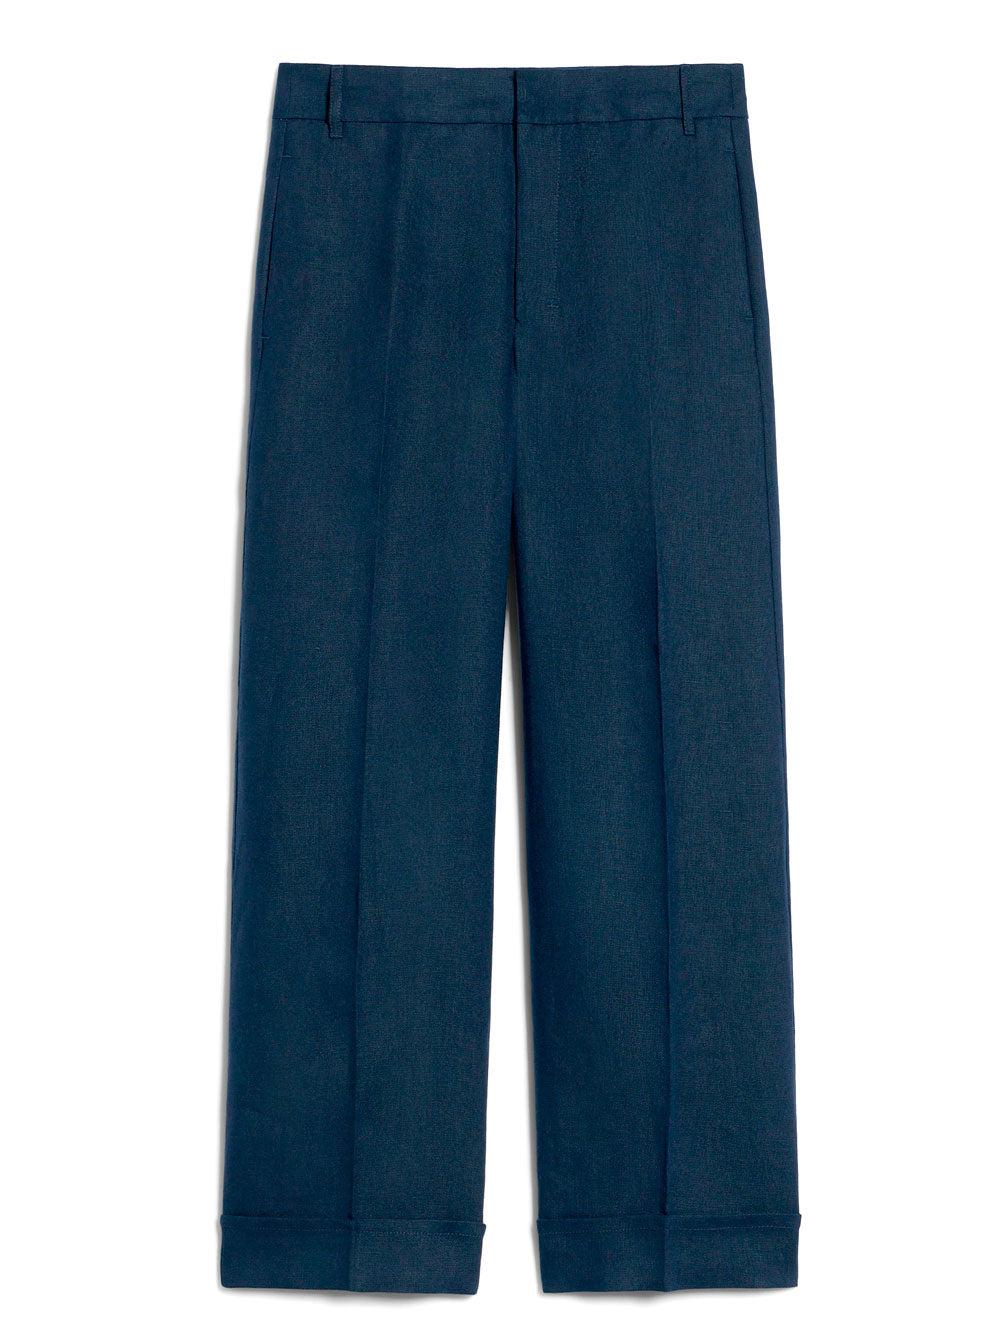 Weekend Max Mara Blue printed trousers - size UK 10 Cotton ref